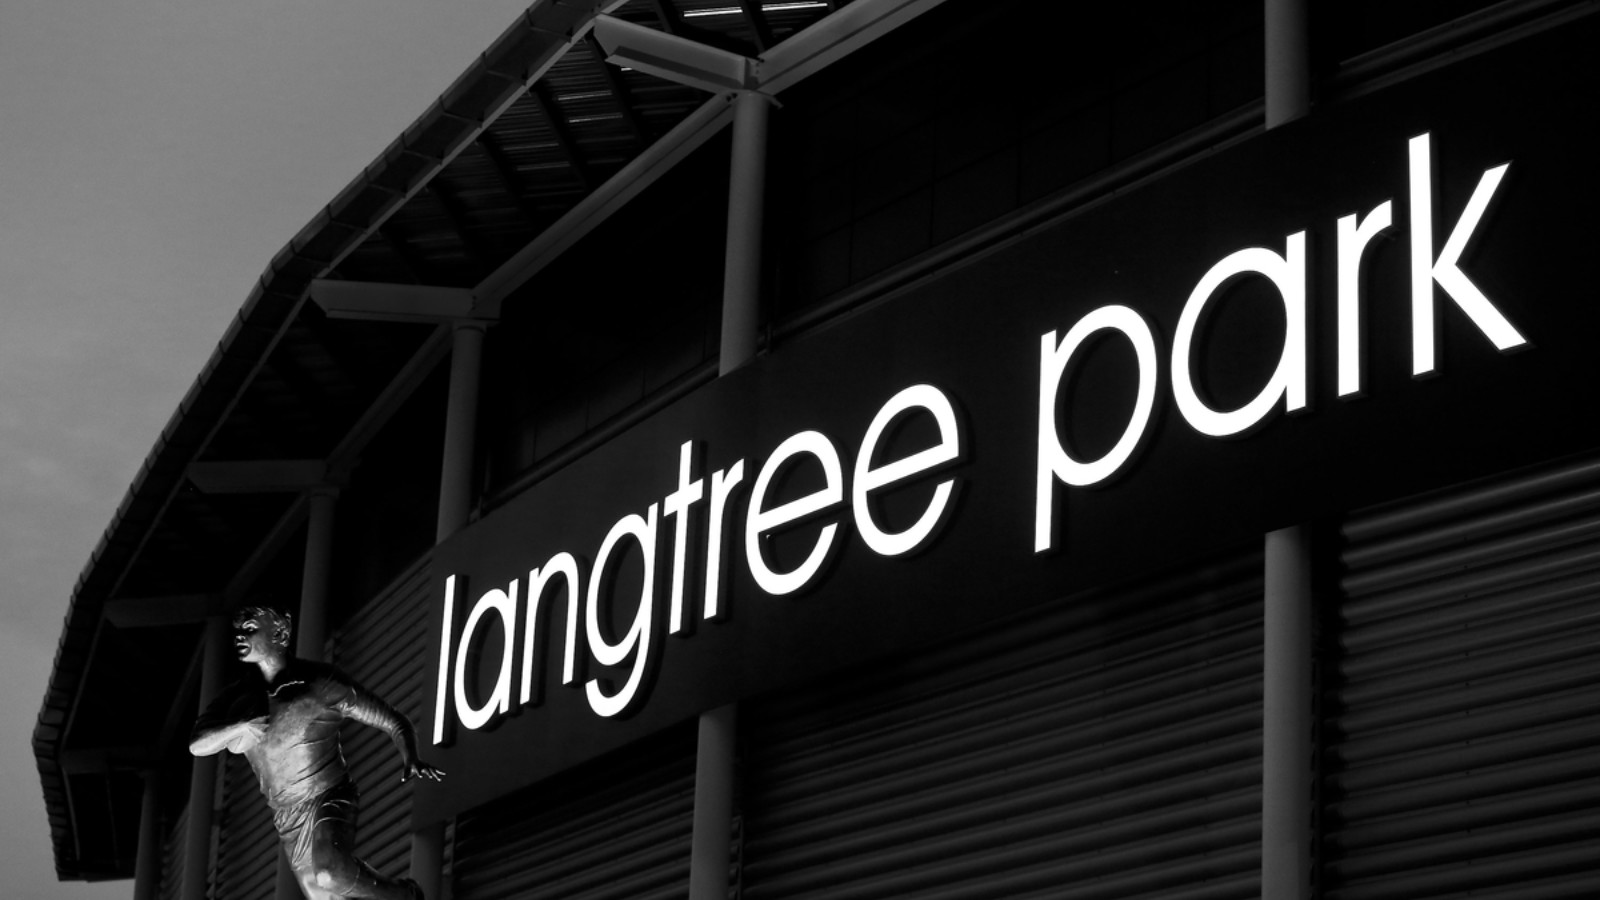 A black and white image of the front of a stadium. The sign reads 'langtree park'.